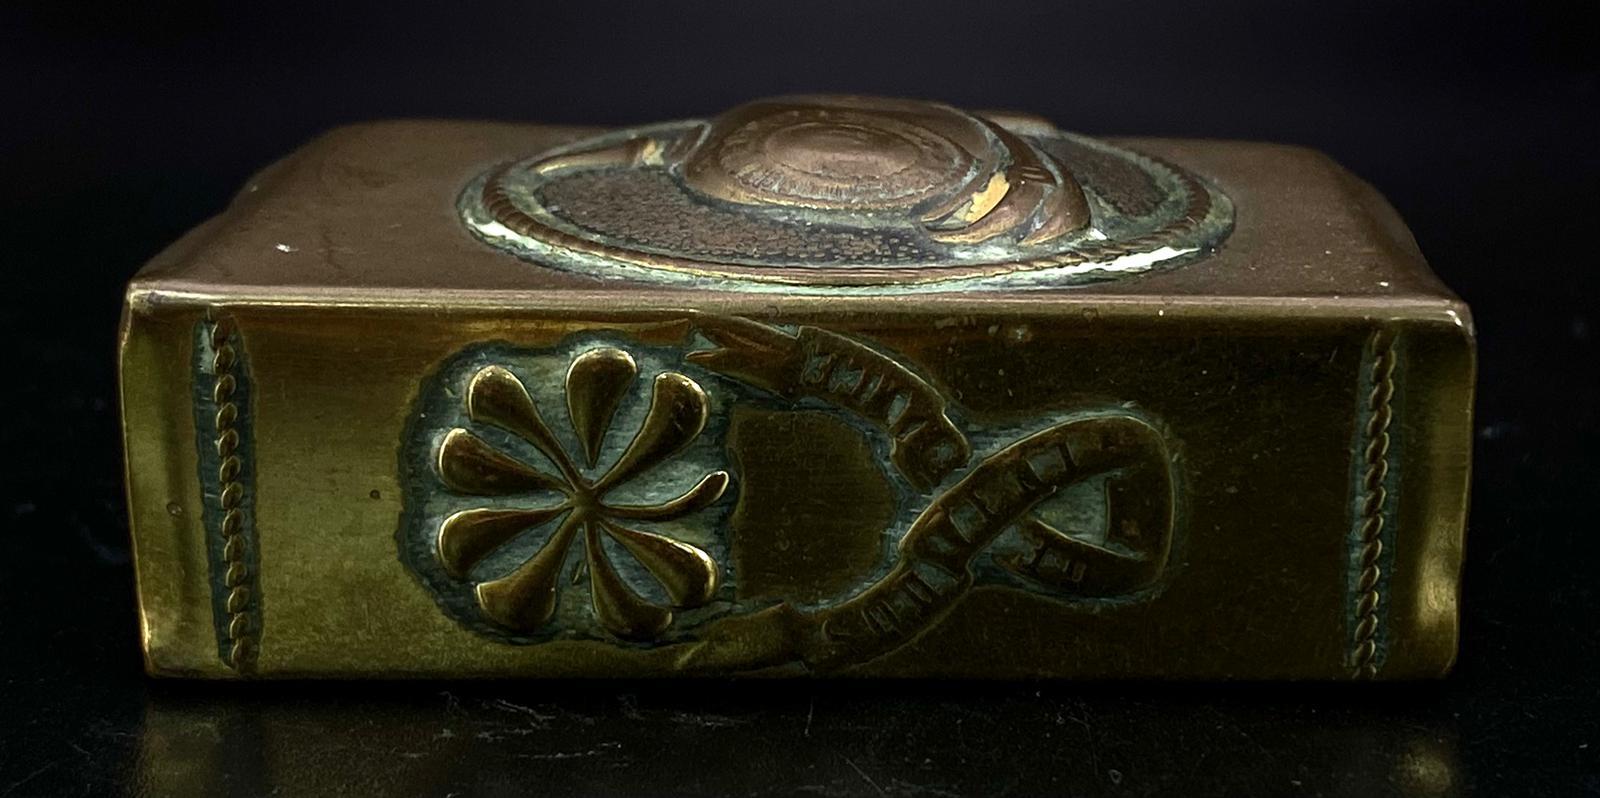 A Vintage Brass Trench Art Matchbox/Vesta Holder with Raised Relief of a German 'Pickelhaube' - Image 3 of 5